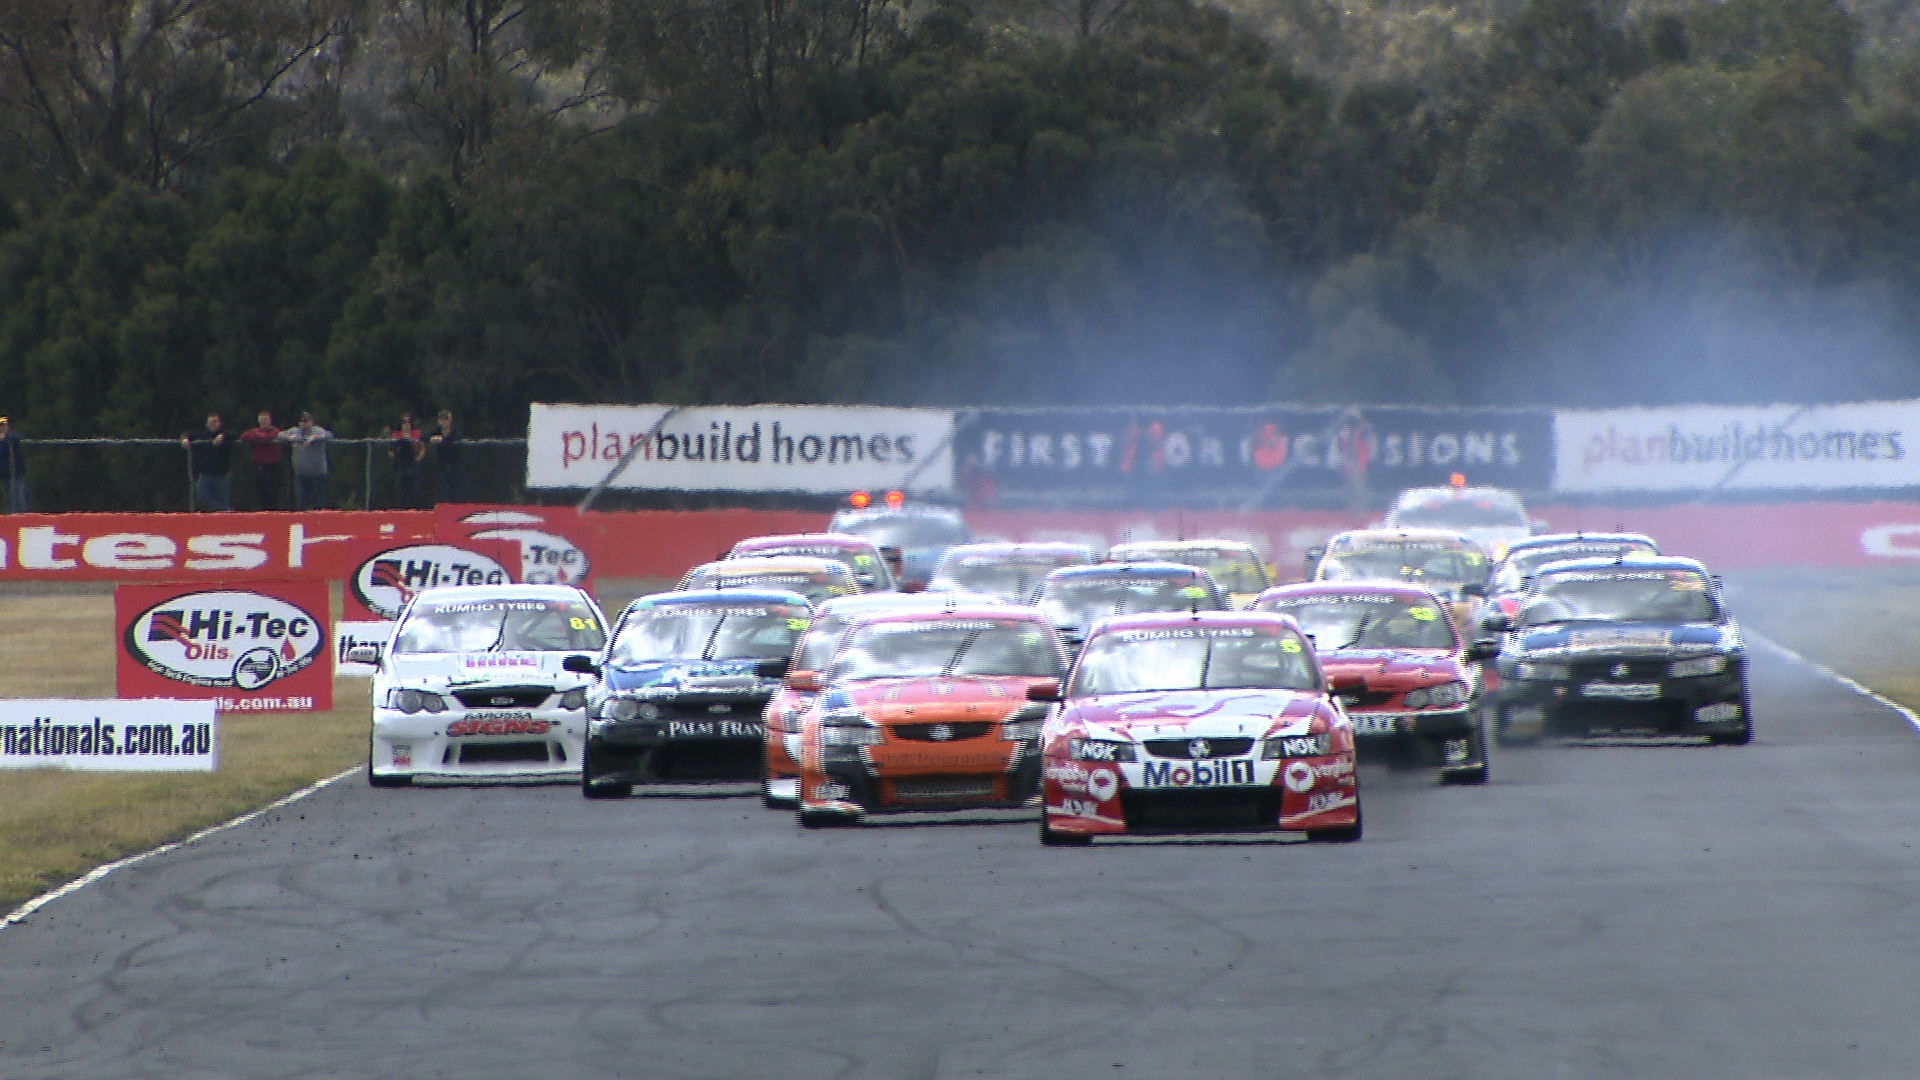 Sports V8 Supercars HD Wallpaper | Background Image